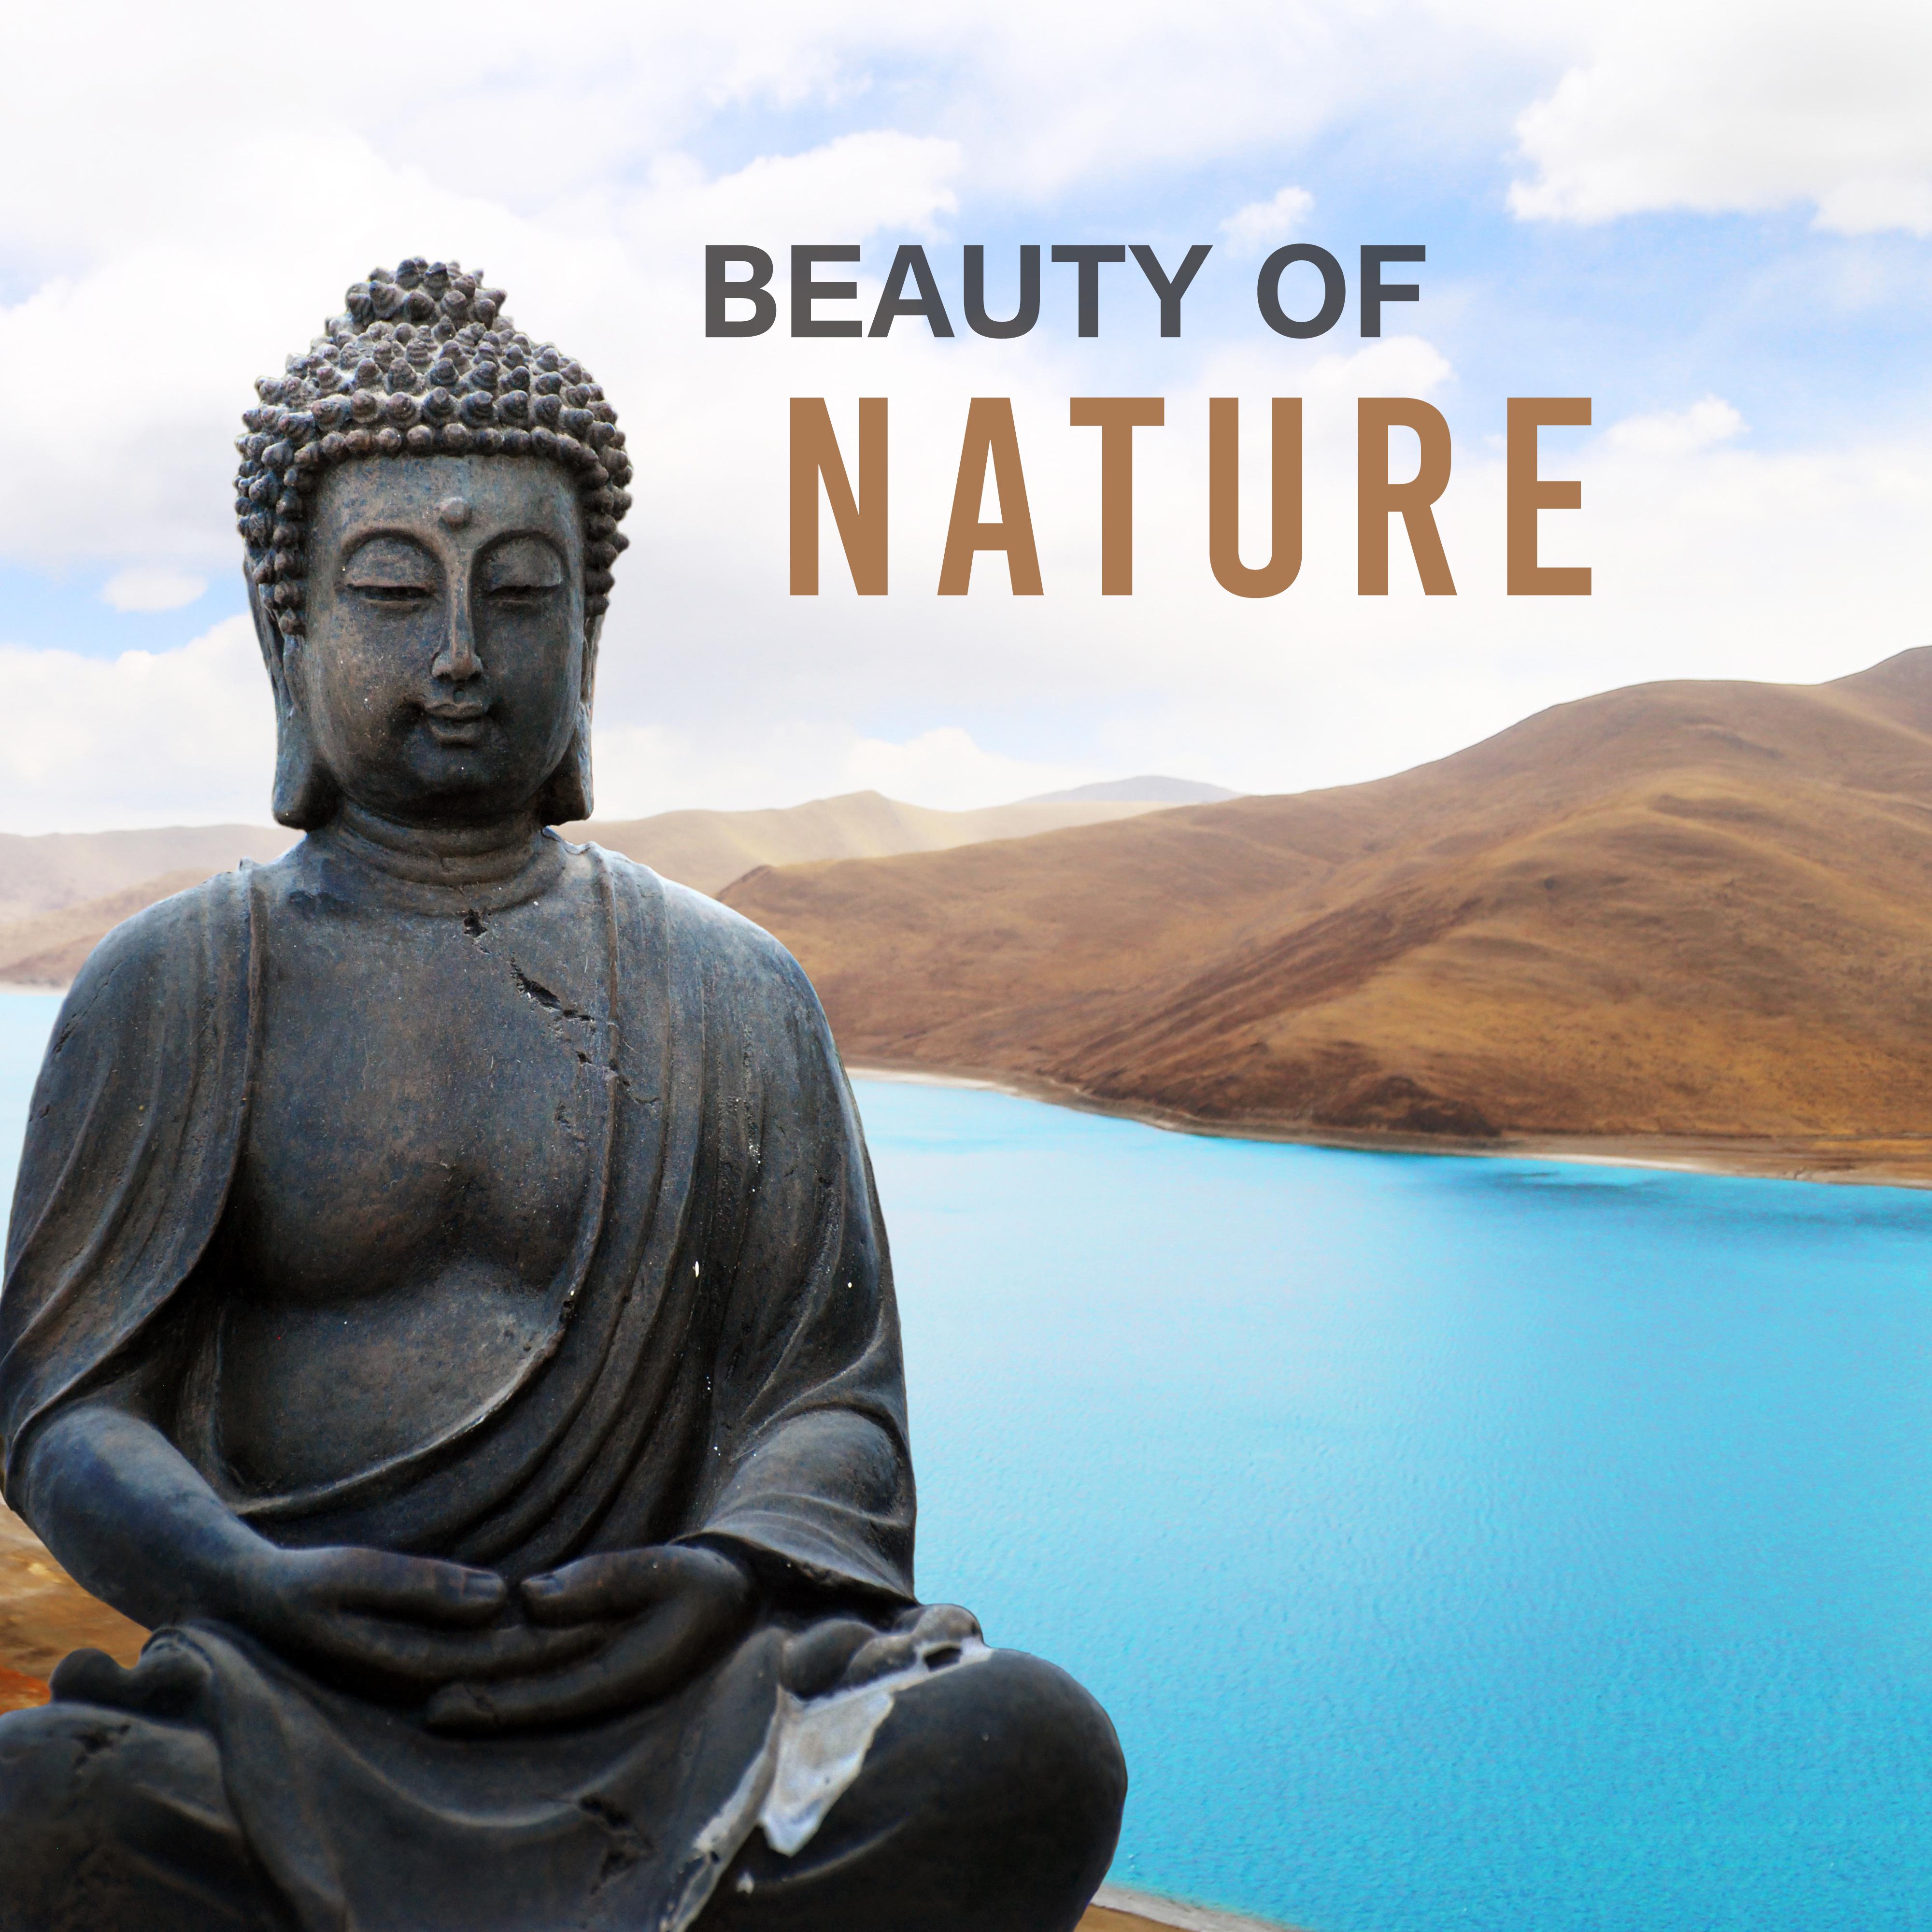 Beauty of Nature  Meditation Music, Nature Sounds, Stress Relief, Zen, Relaxation Music, Training Yoga, Tranquility  Harmony